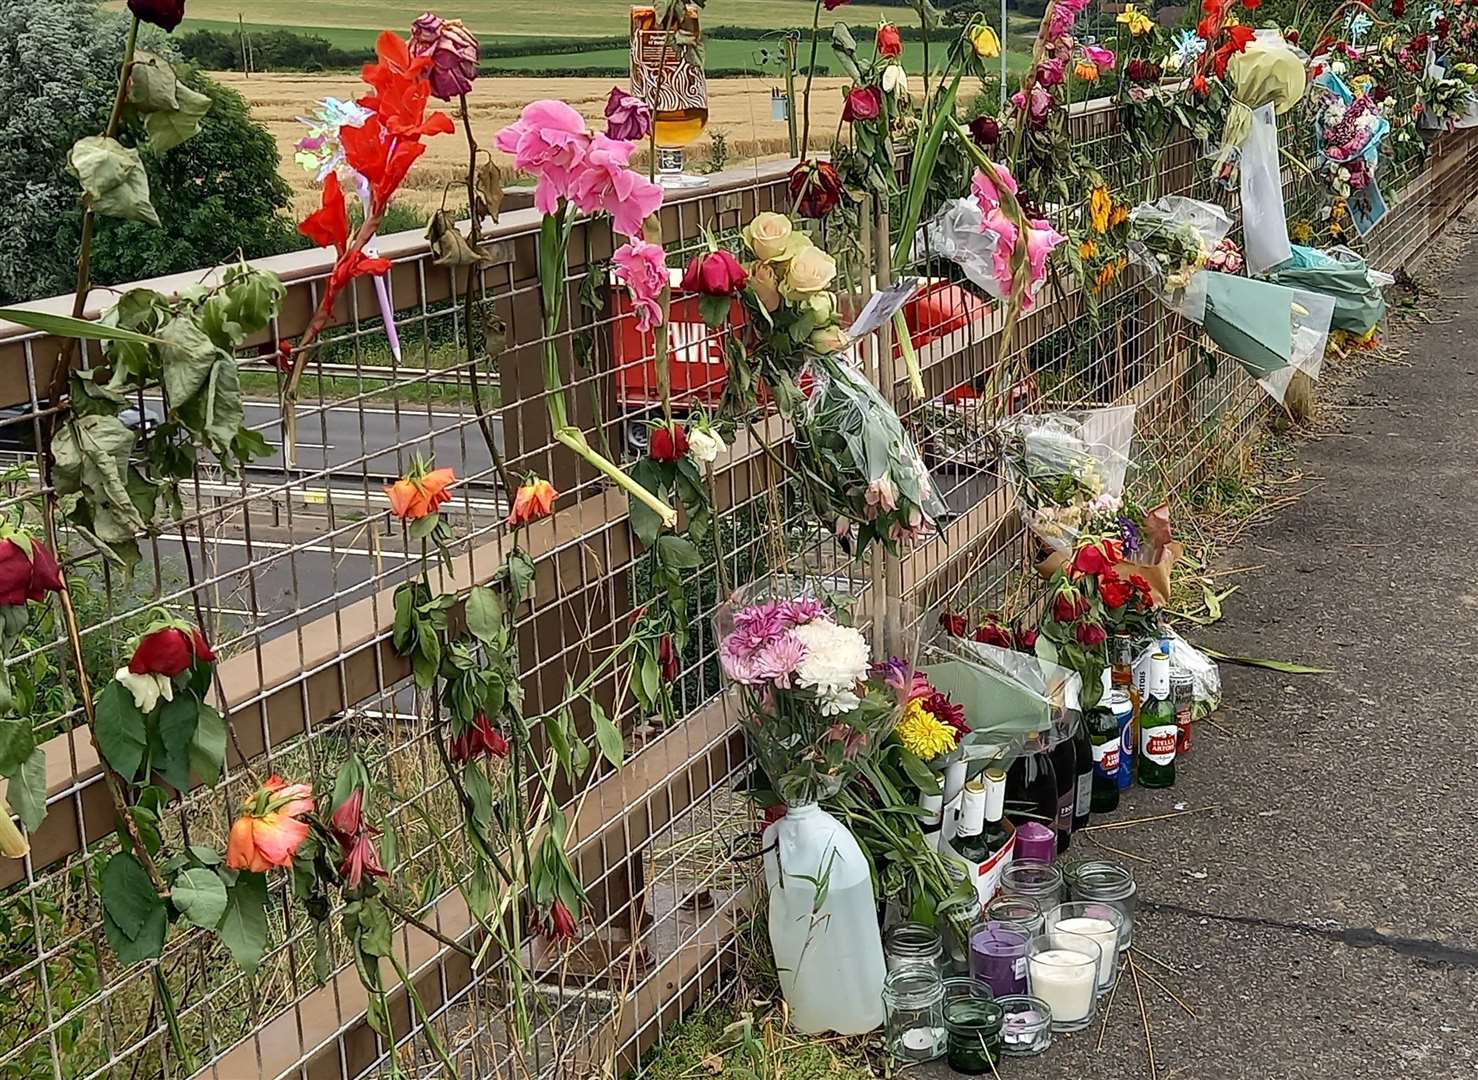 Floral tributes were left on the bridge where Lee Harlow died